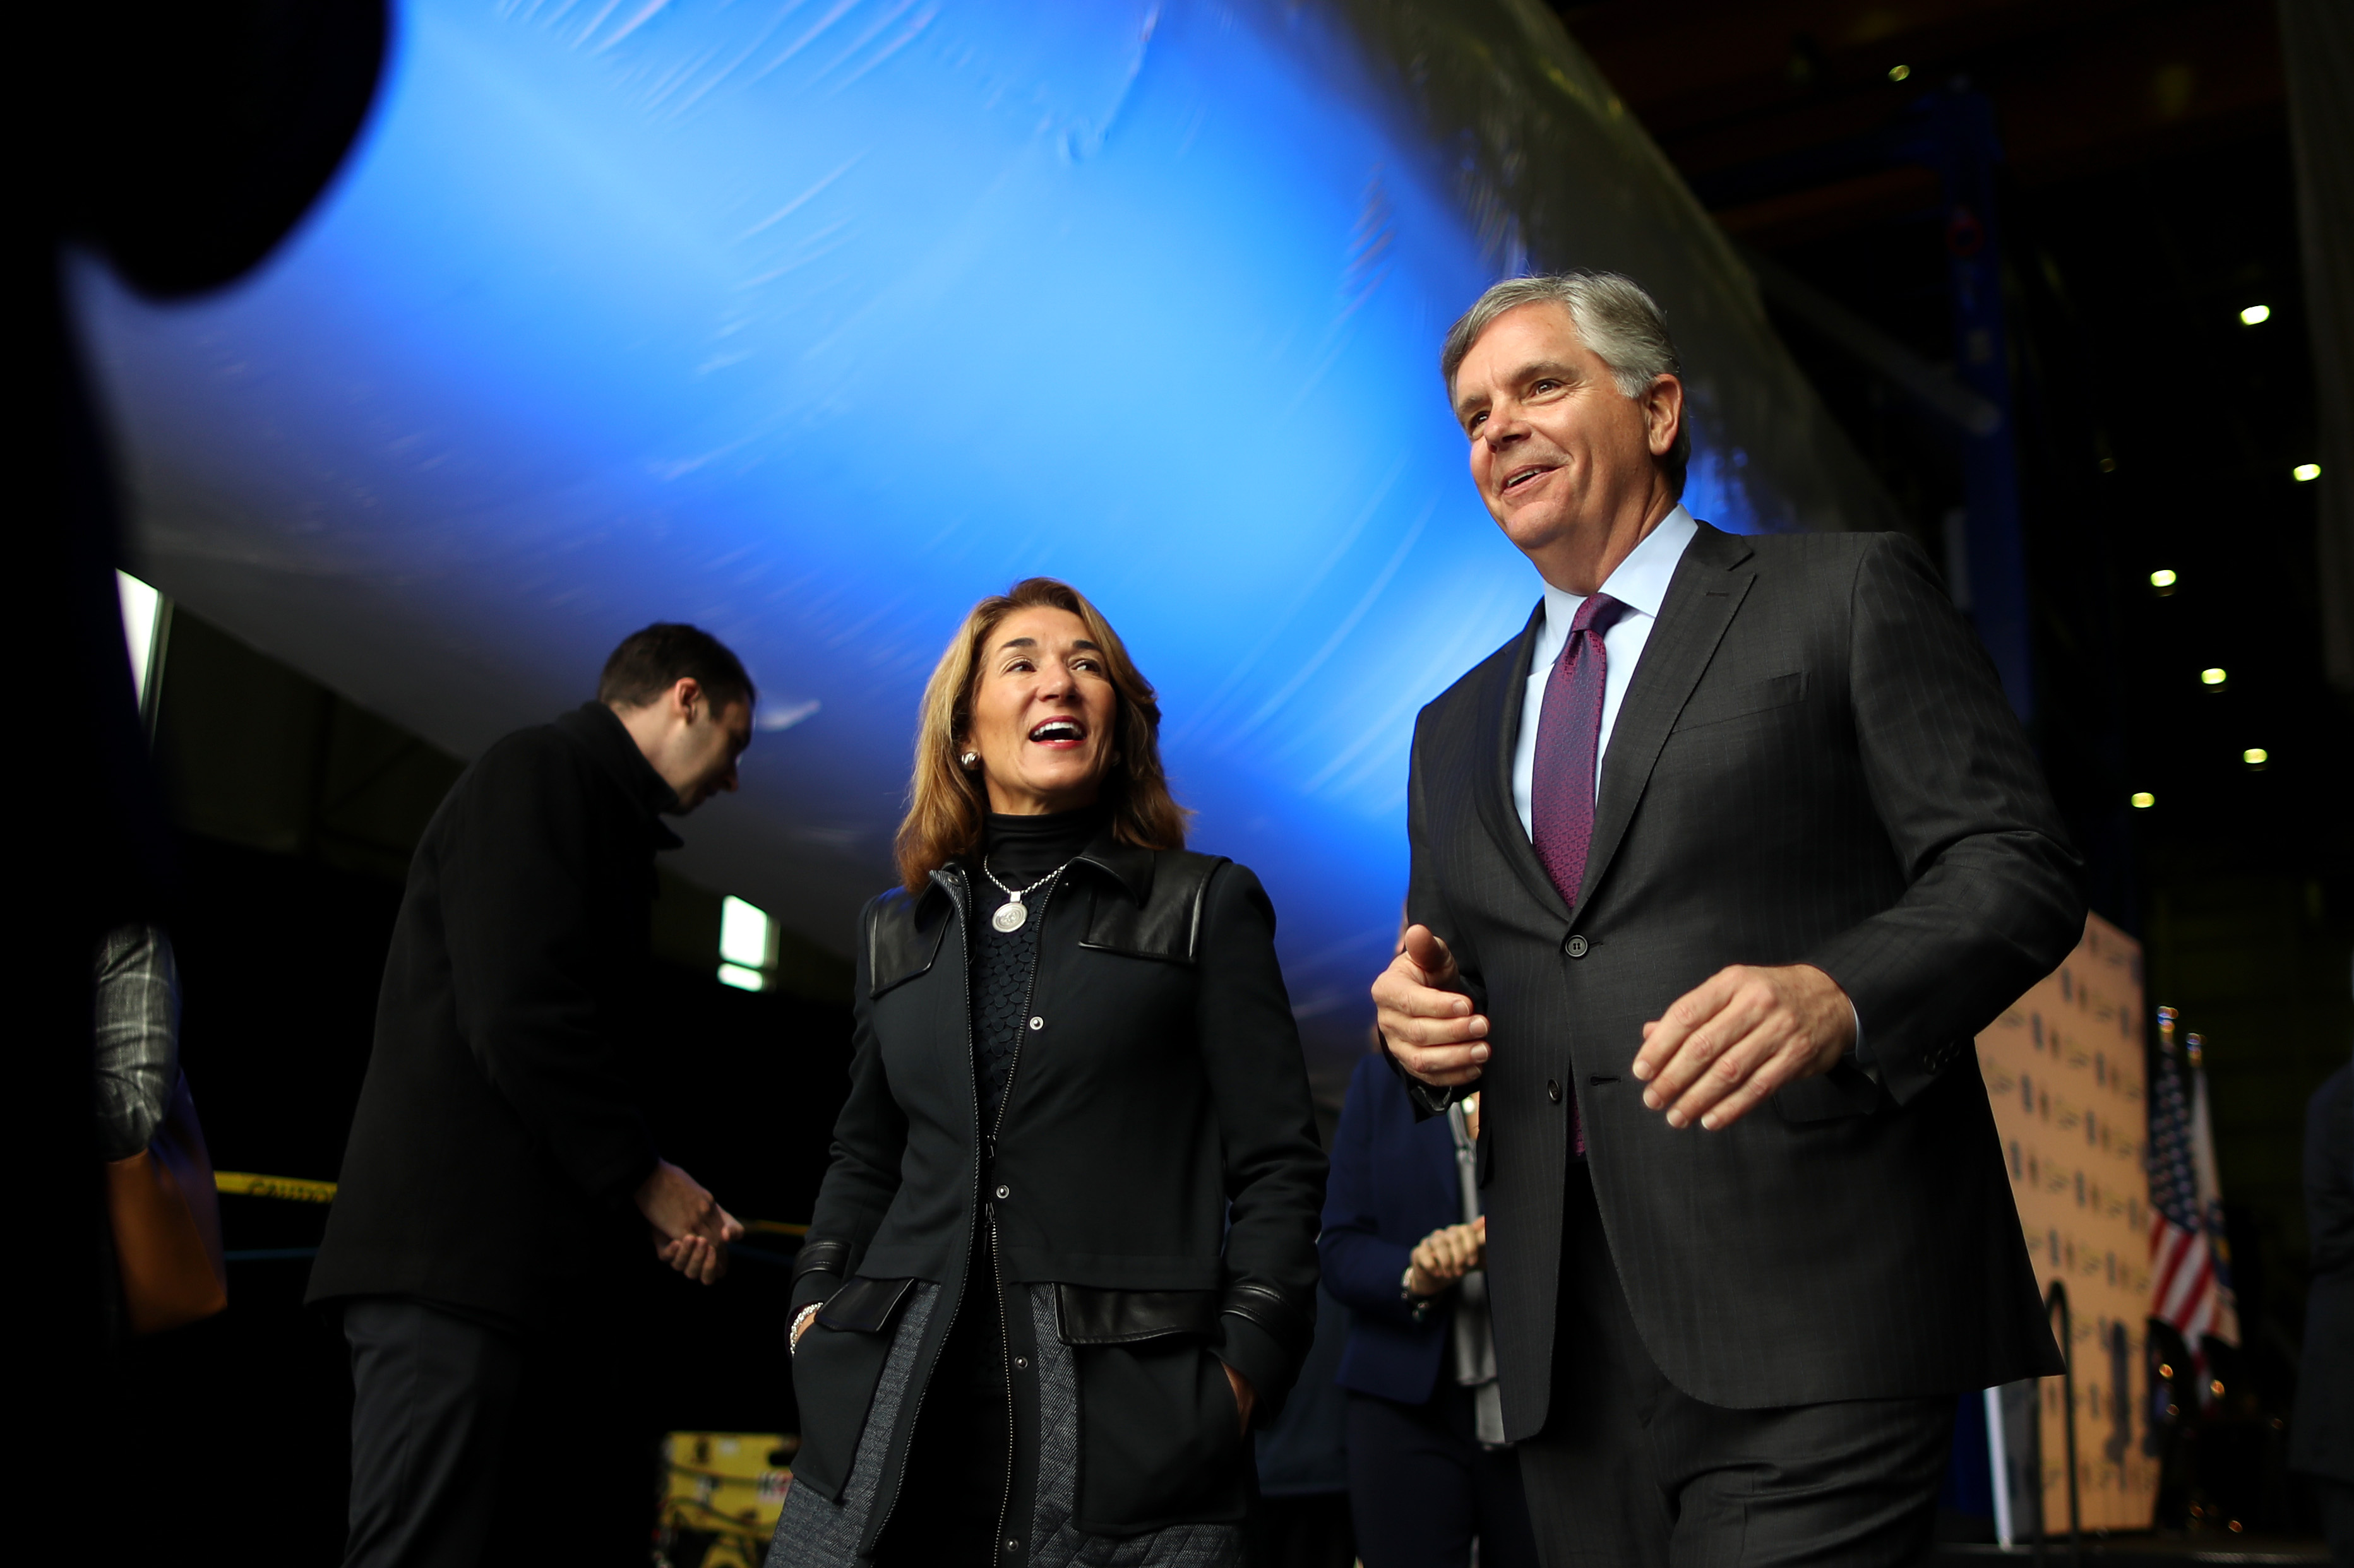  Lieutenant Governor Karyn Polito spoke with General Electric CEO Larry Culp as General Electric unveiled the world's largest offshore wind turbine blade at a wind testing facility in Charlestown in 2019. 